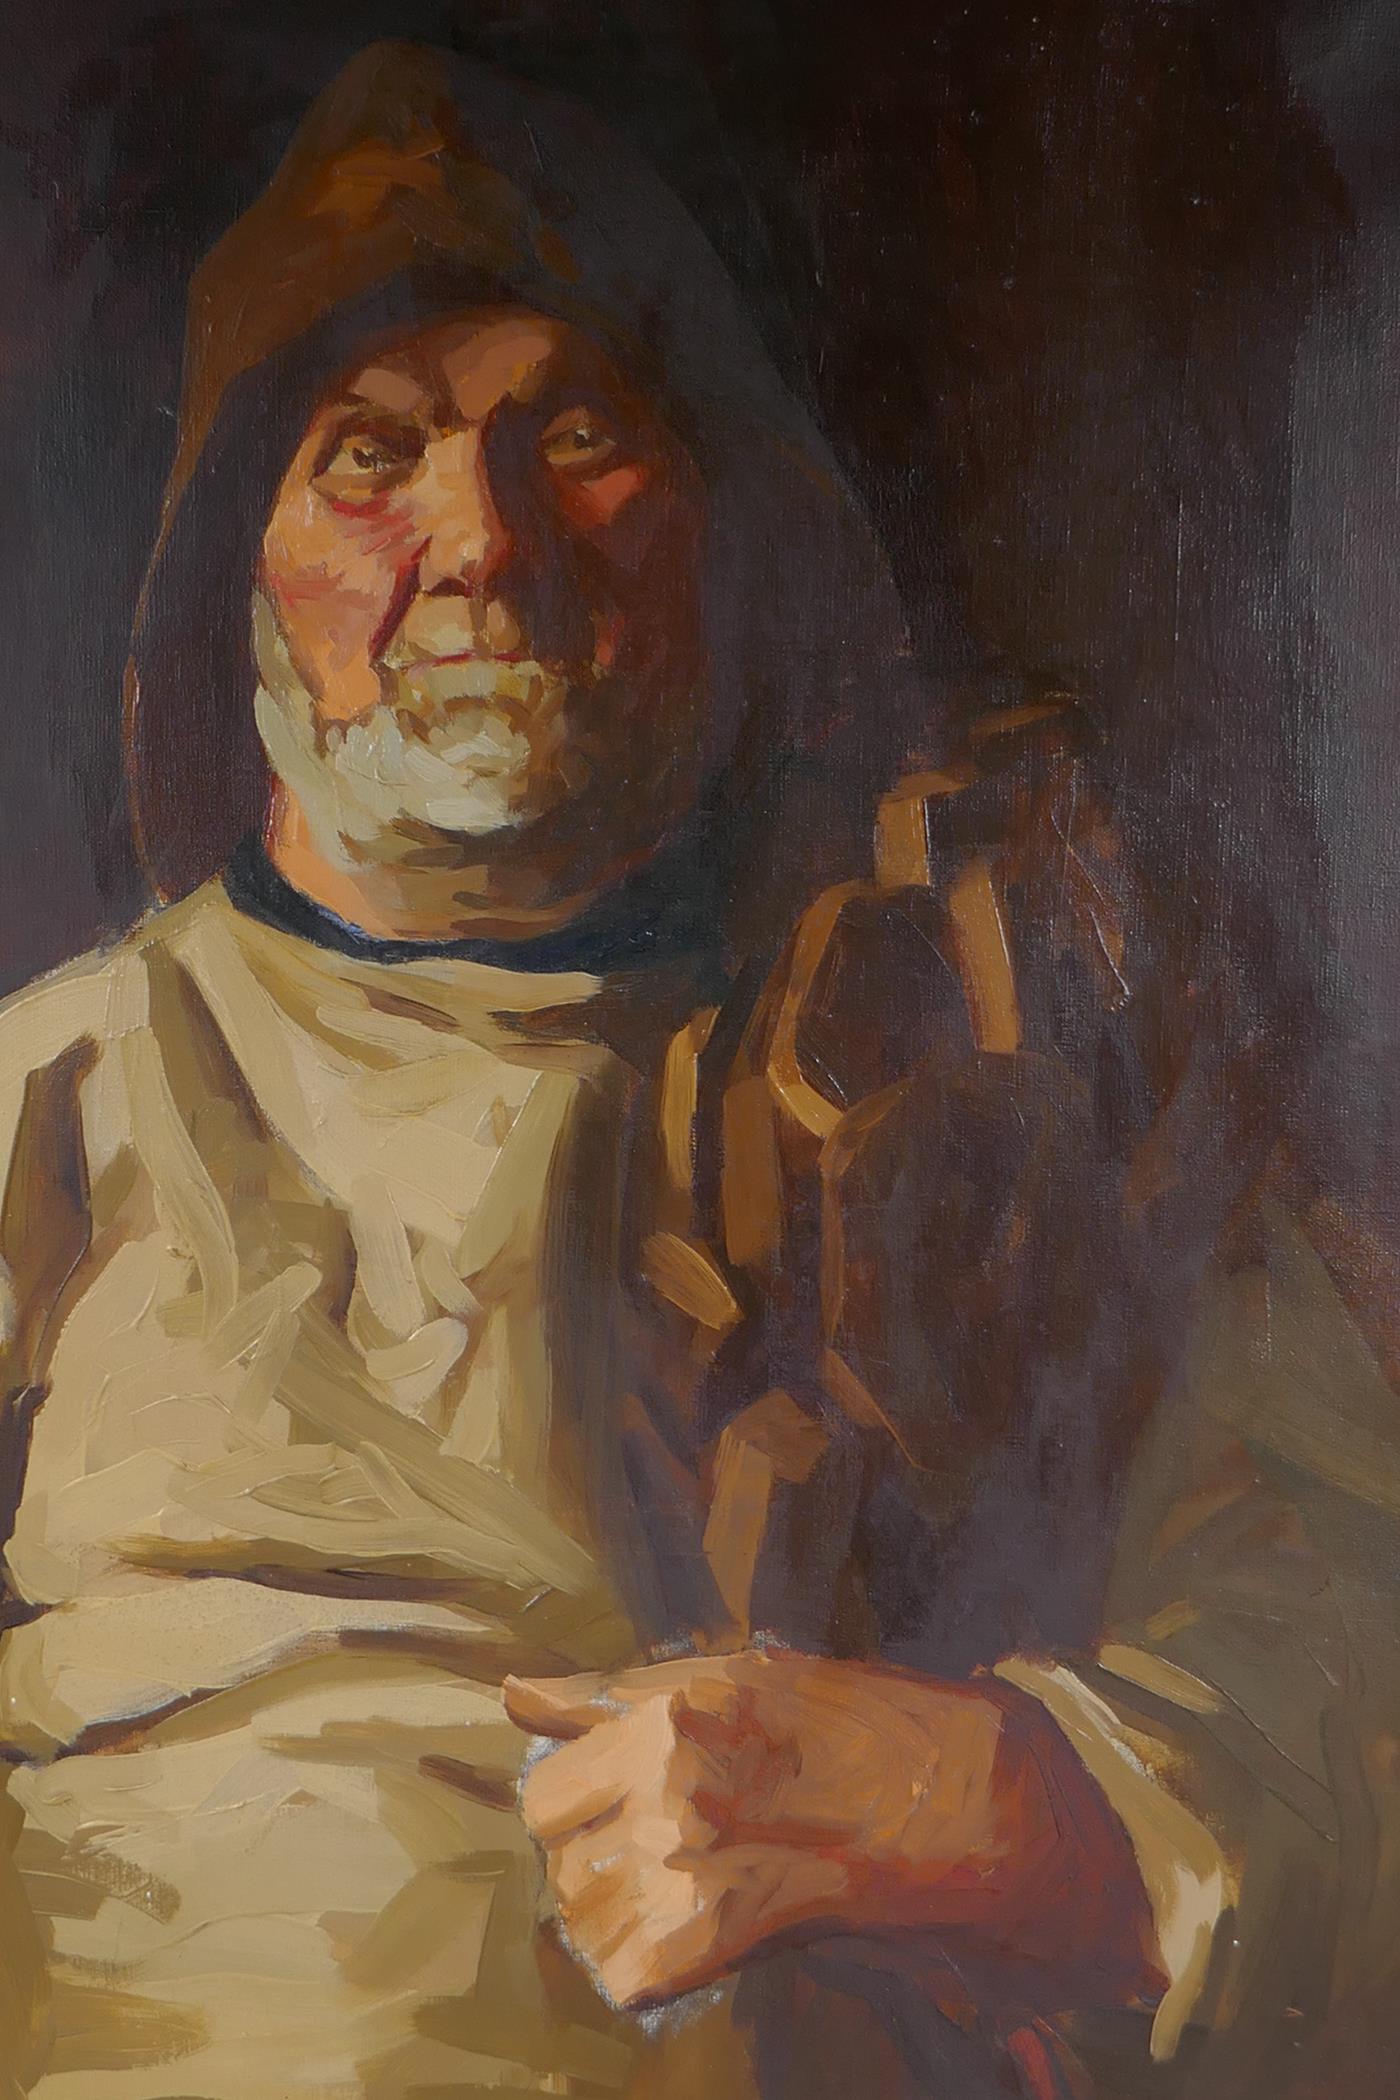 Portrait of a fisherman, early C20th, oil on canvas, 75 x 50cm - Image 3 of 5